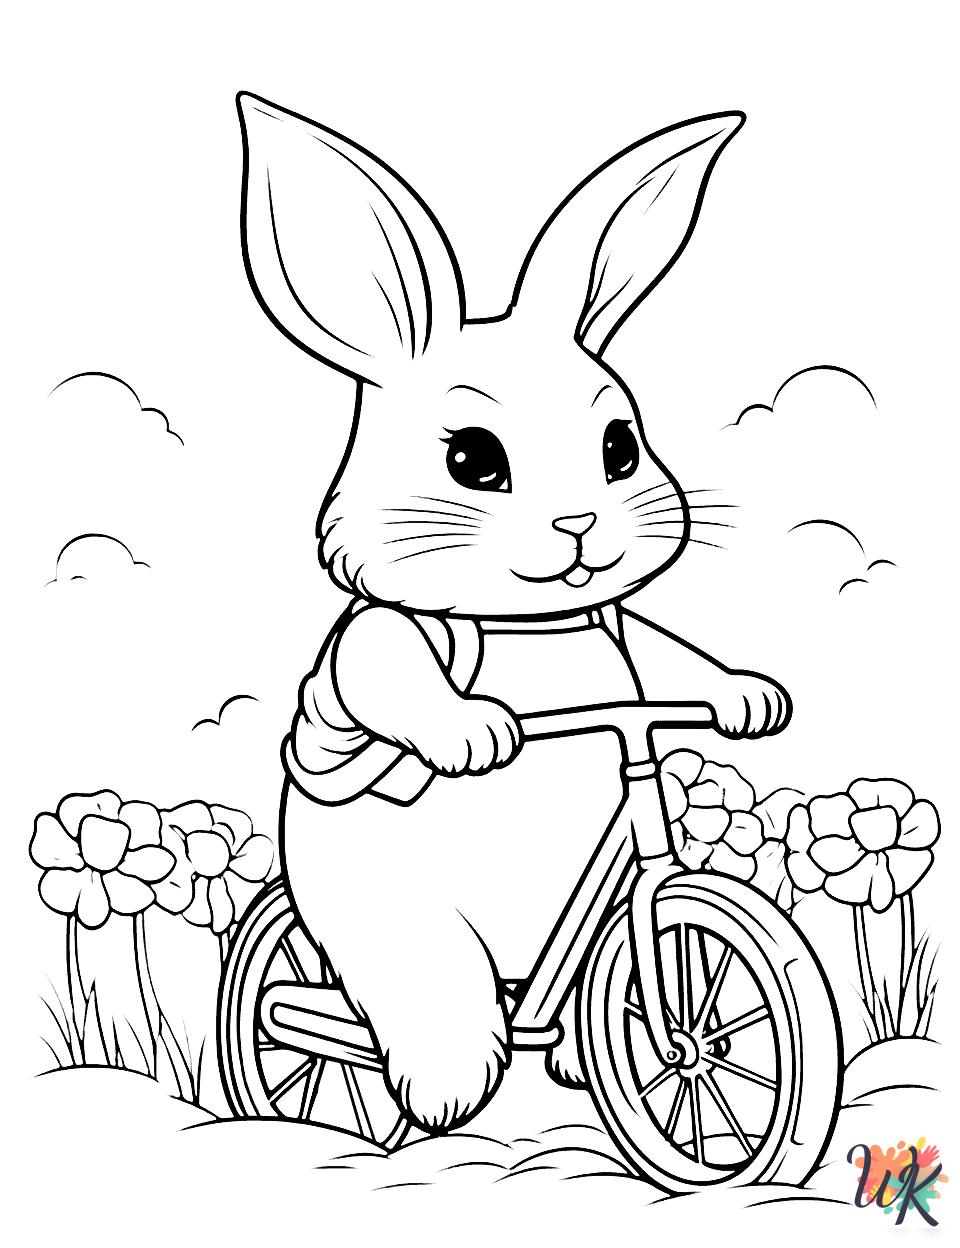 Rabbits coloring pages pdf